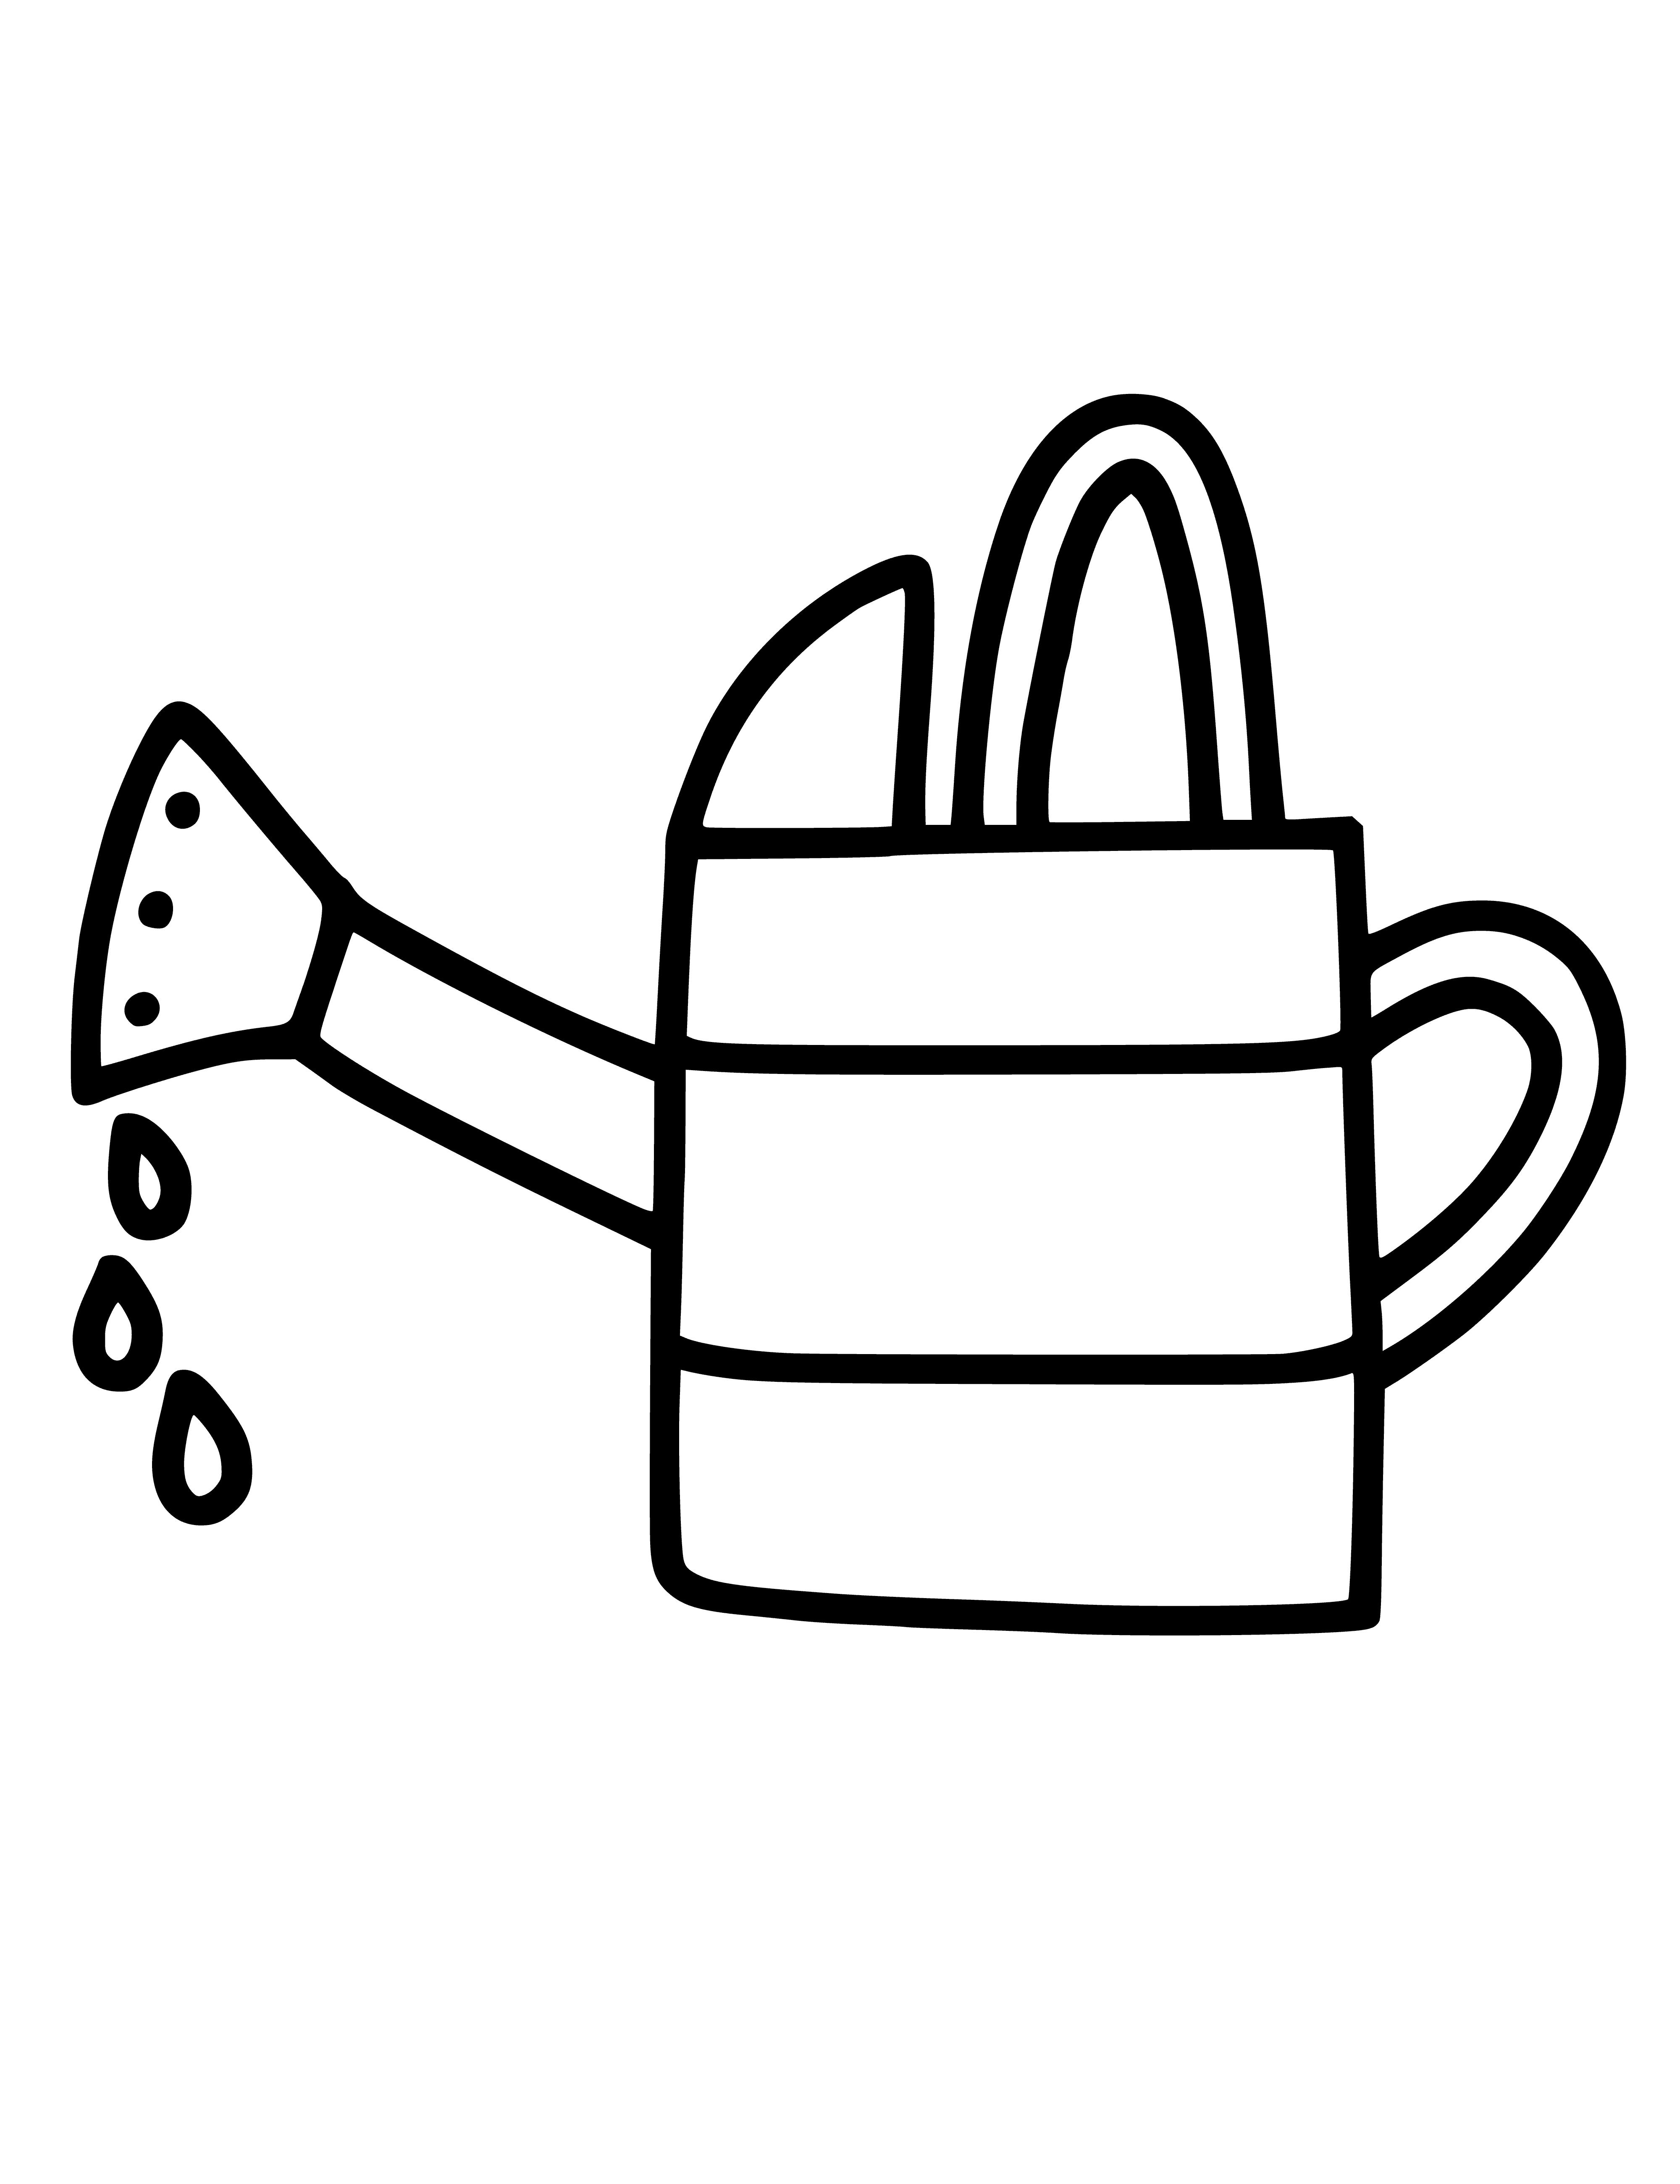 coloring page: Watering can in center of page; red w/yellow handle, water flowing into green plant.